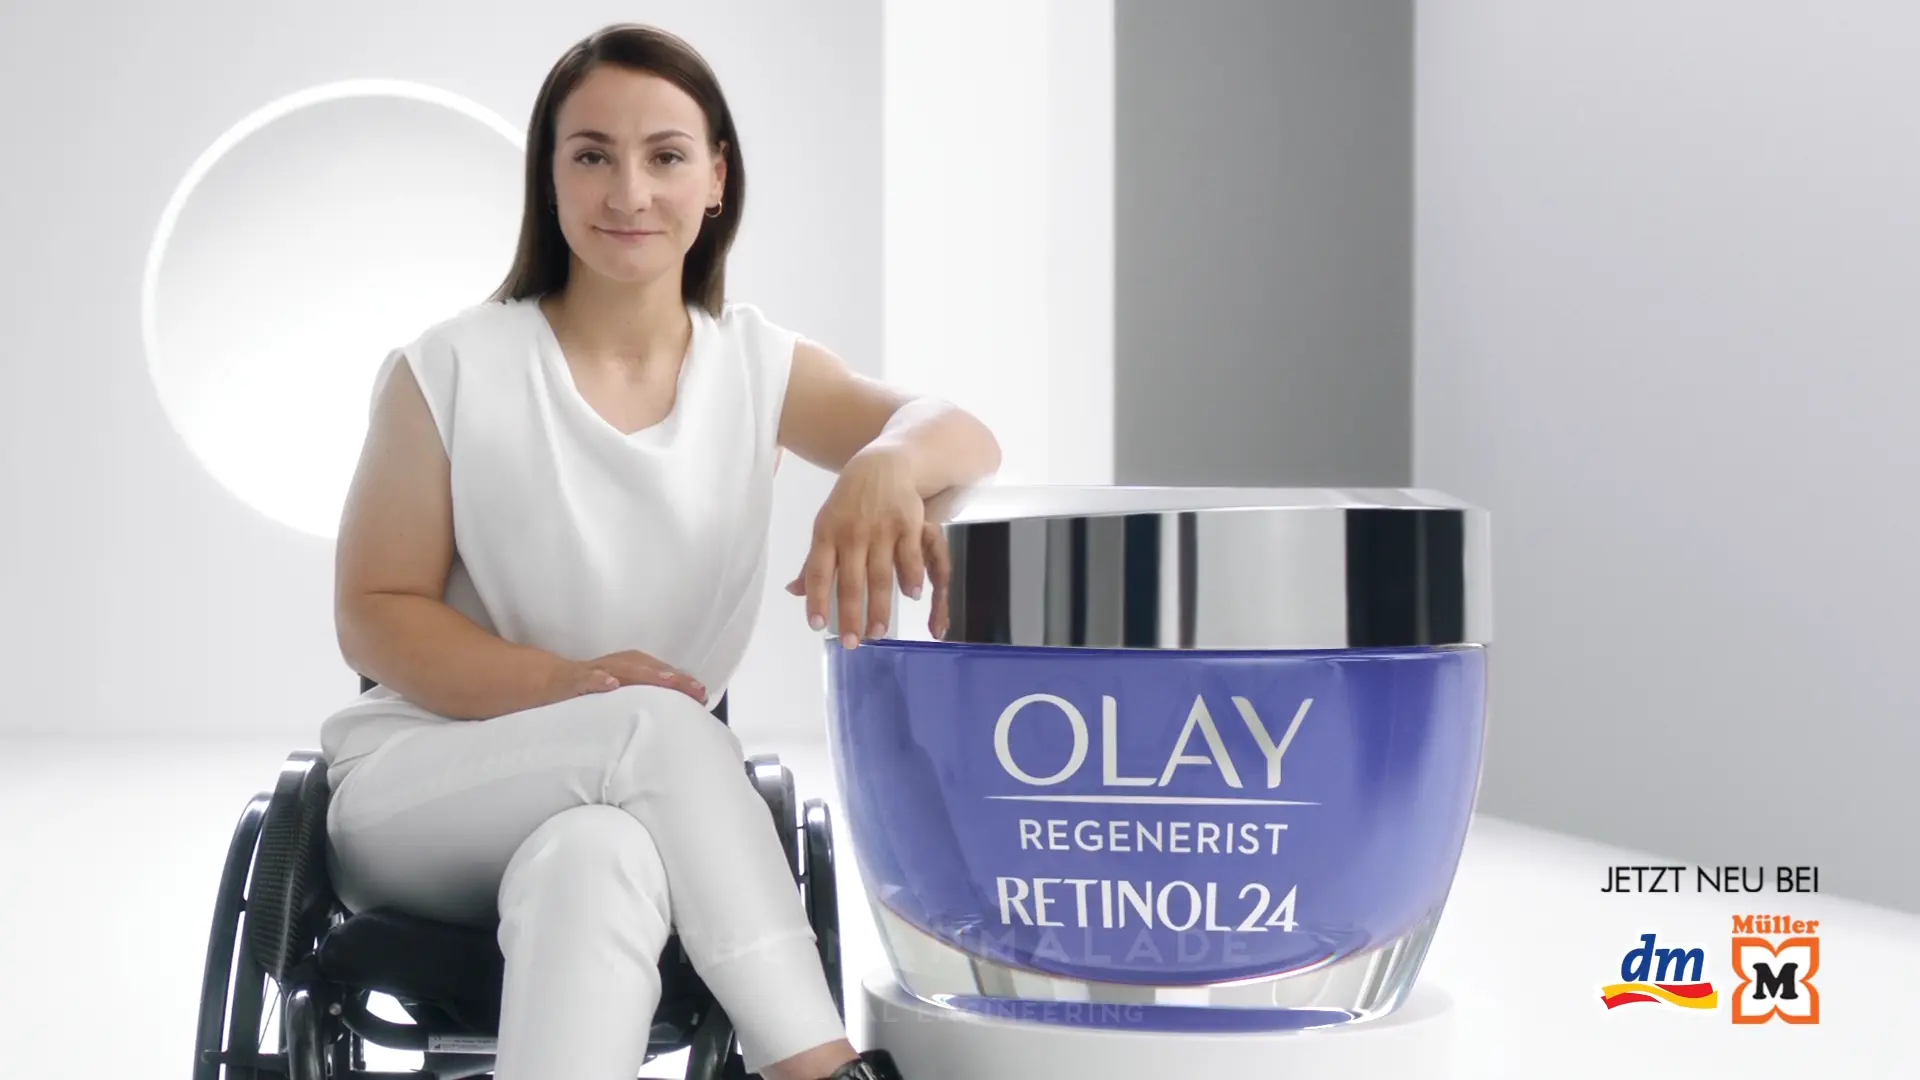         

              Client: OLAY;
              
              Production: The Marmalade;;

              In the visually captivating campaign for OLAY Retinol Regenerist, 
              I had the unique opportunity to light and render the packshot featuring Kristina Vogel, 
              the esteemed German track cyclist and two-time Olympic champion.;
              
              The focal point of my role was to ensure that the packshot perfectly encapsulated the qualities 
              of OLAY Retinol Regenerist while also complementing Kristina Vogel's dynamic and inspirational image.
            
            